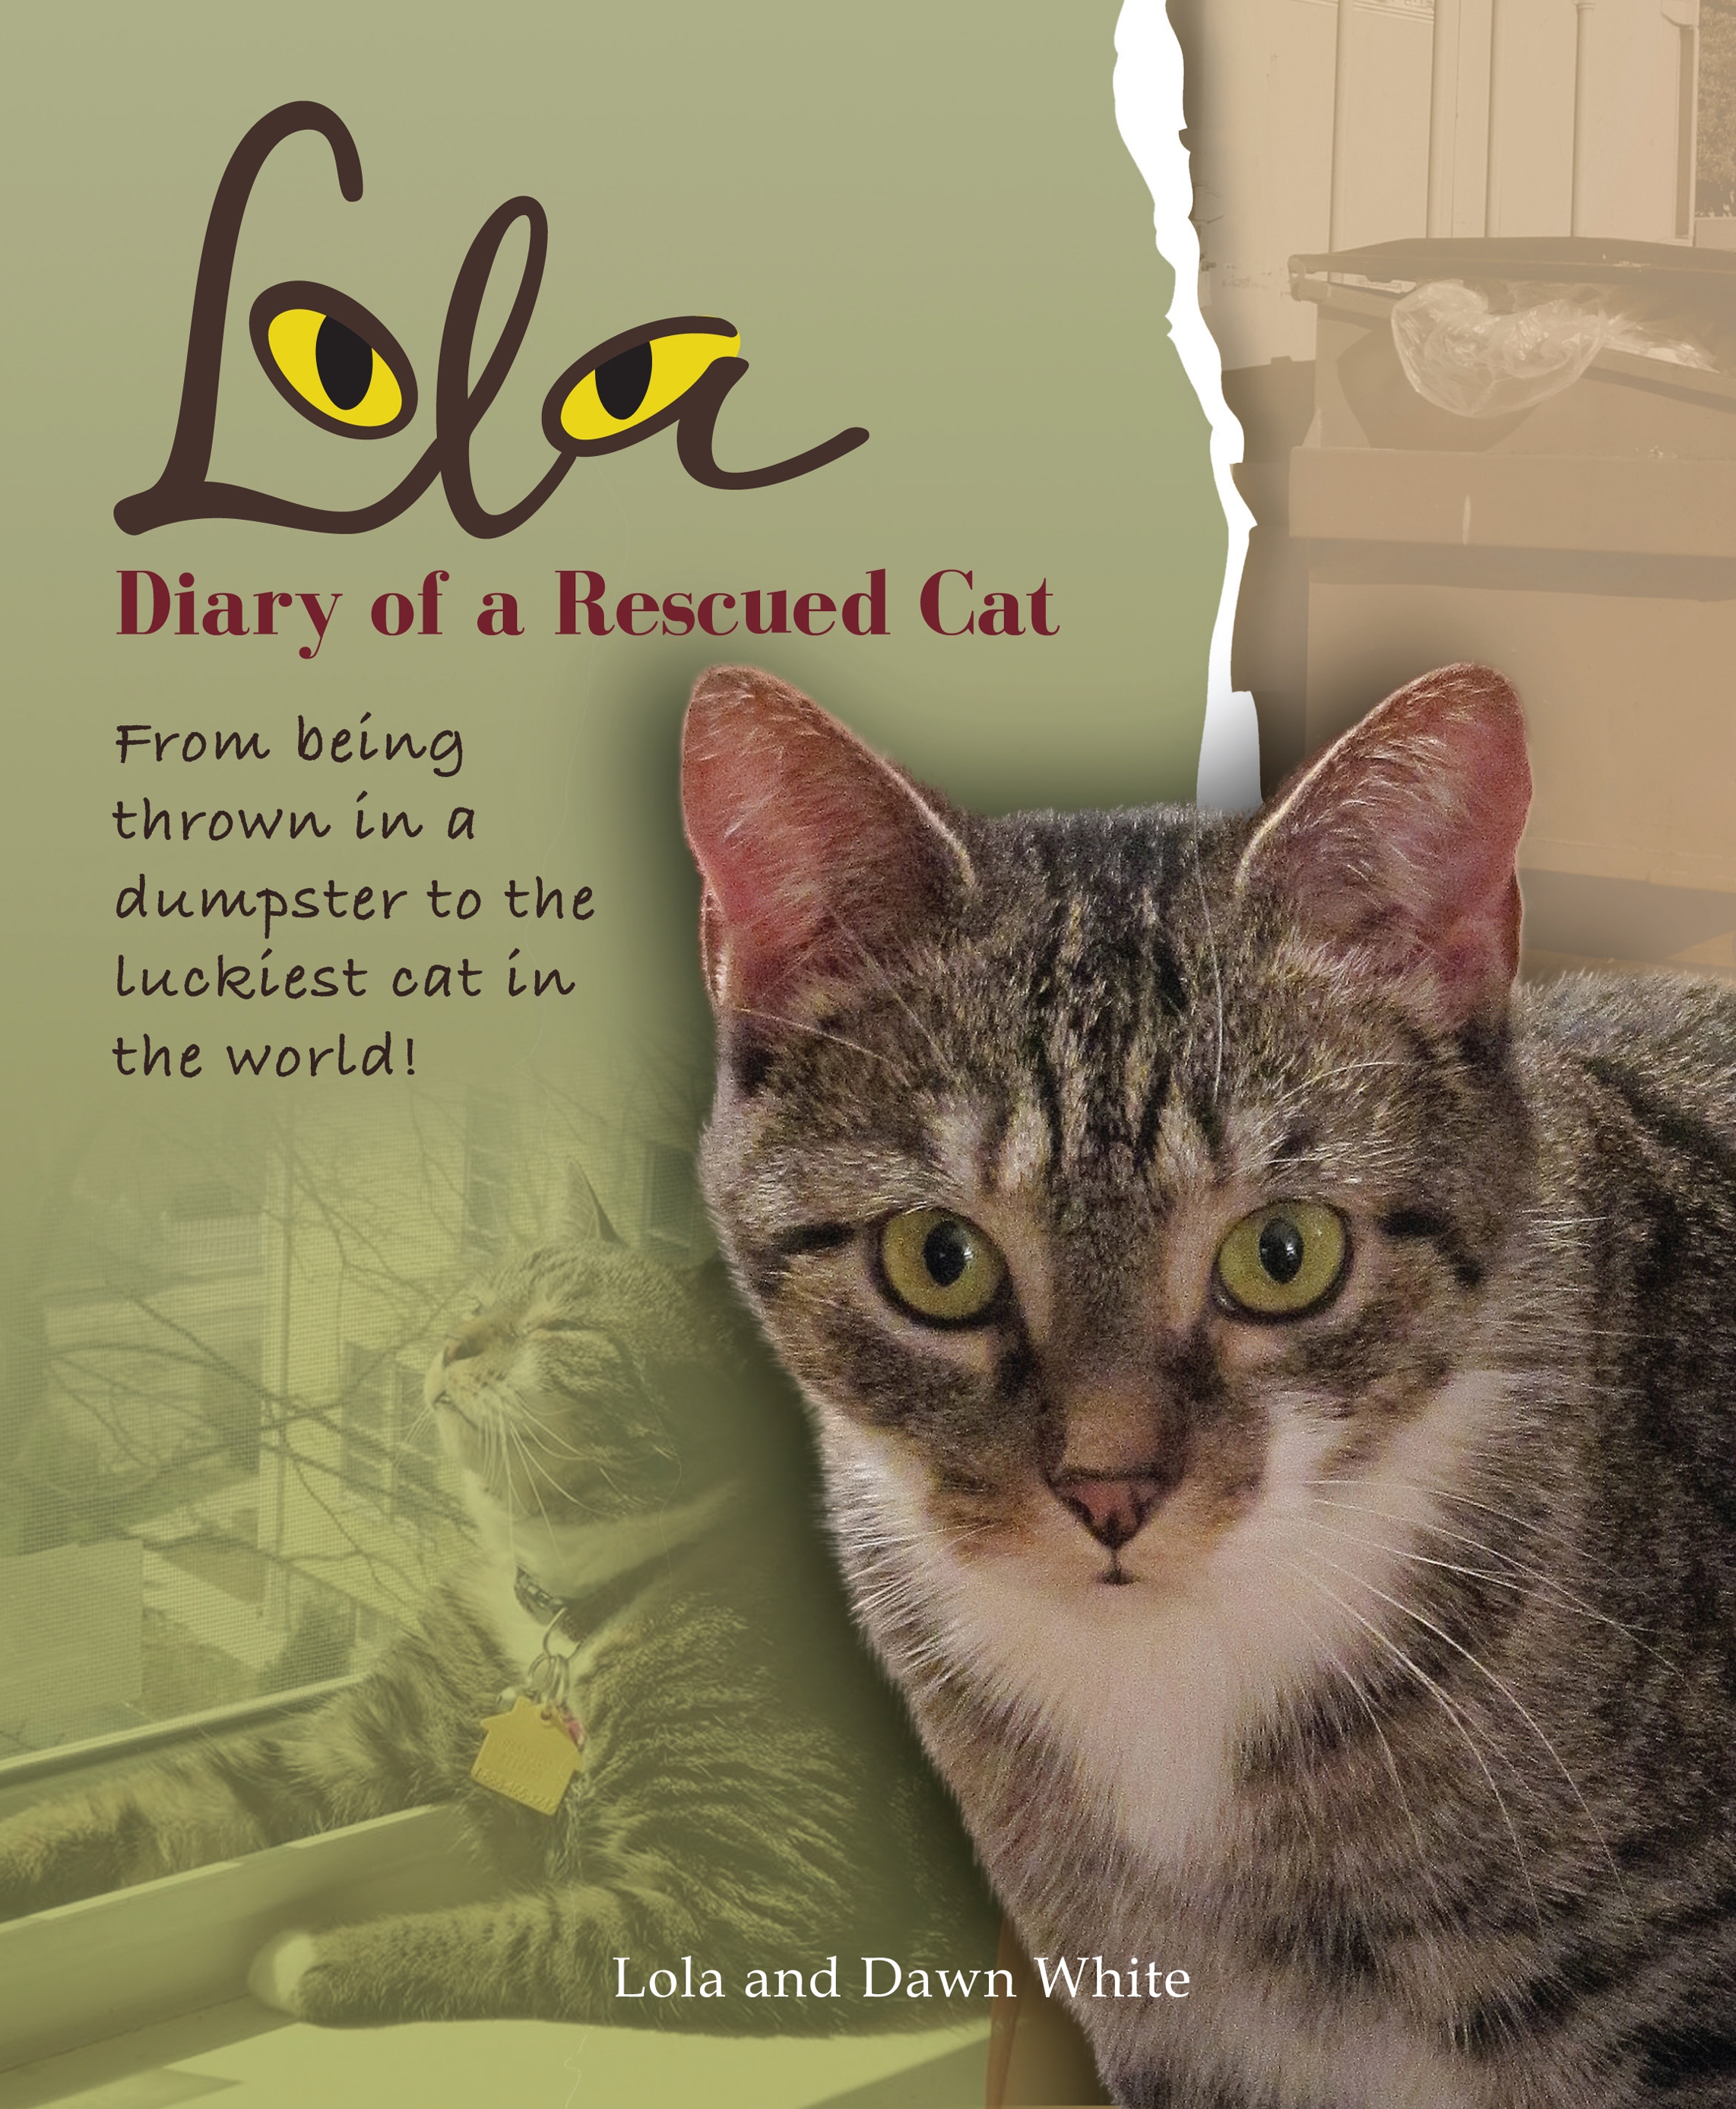 Lola: Diary of a Rescued Cat – From Being Thrown in a Dumpster to the Luckiest Cat in the World!